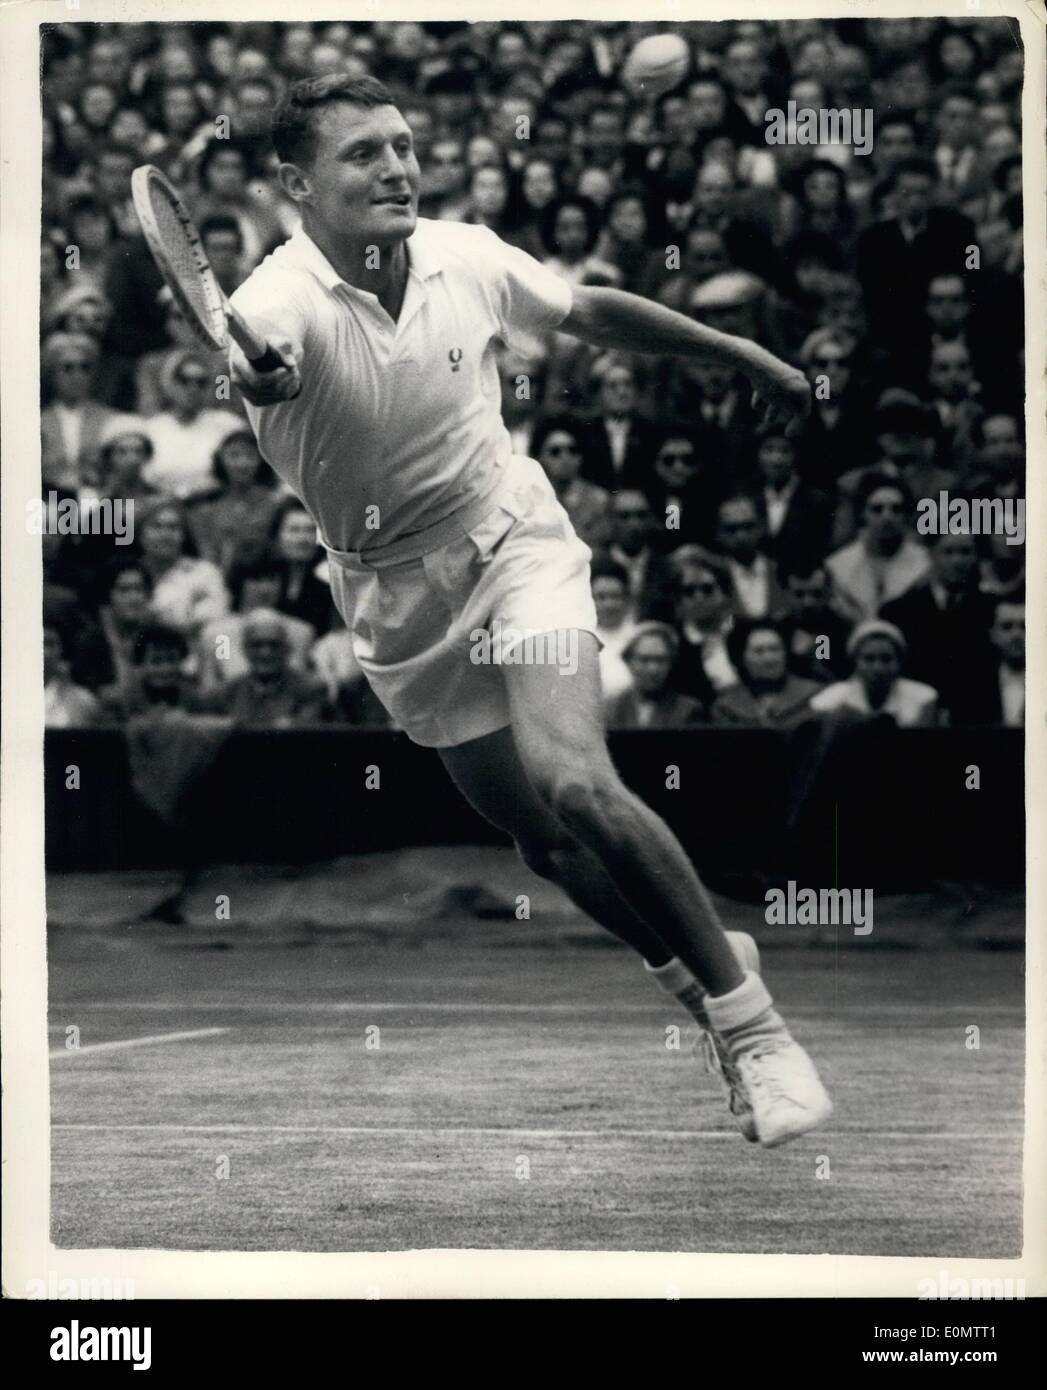 Jul. 05, 1956 - 5-7-56 Tennis Championships at Wimbledon. Hoad beats Richardson in semi-final. L.A. Hoad (Australia)today beat H. Richardson (U.S.) in their men's singles semi-final match at Wimbledon. Hoad won 3-6, 6-4, 6-2, 6-4. Keystone Photo Shows: Richardson in play against Hoad at Wimbledon today. Stock Photo